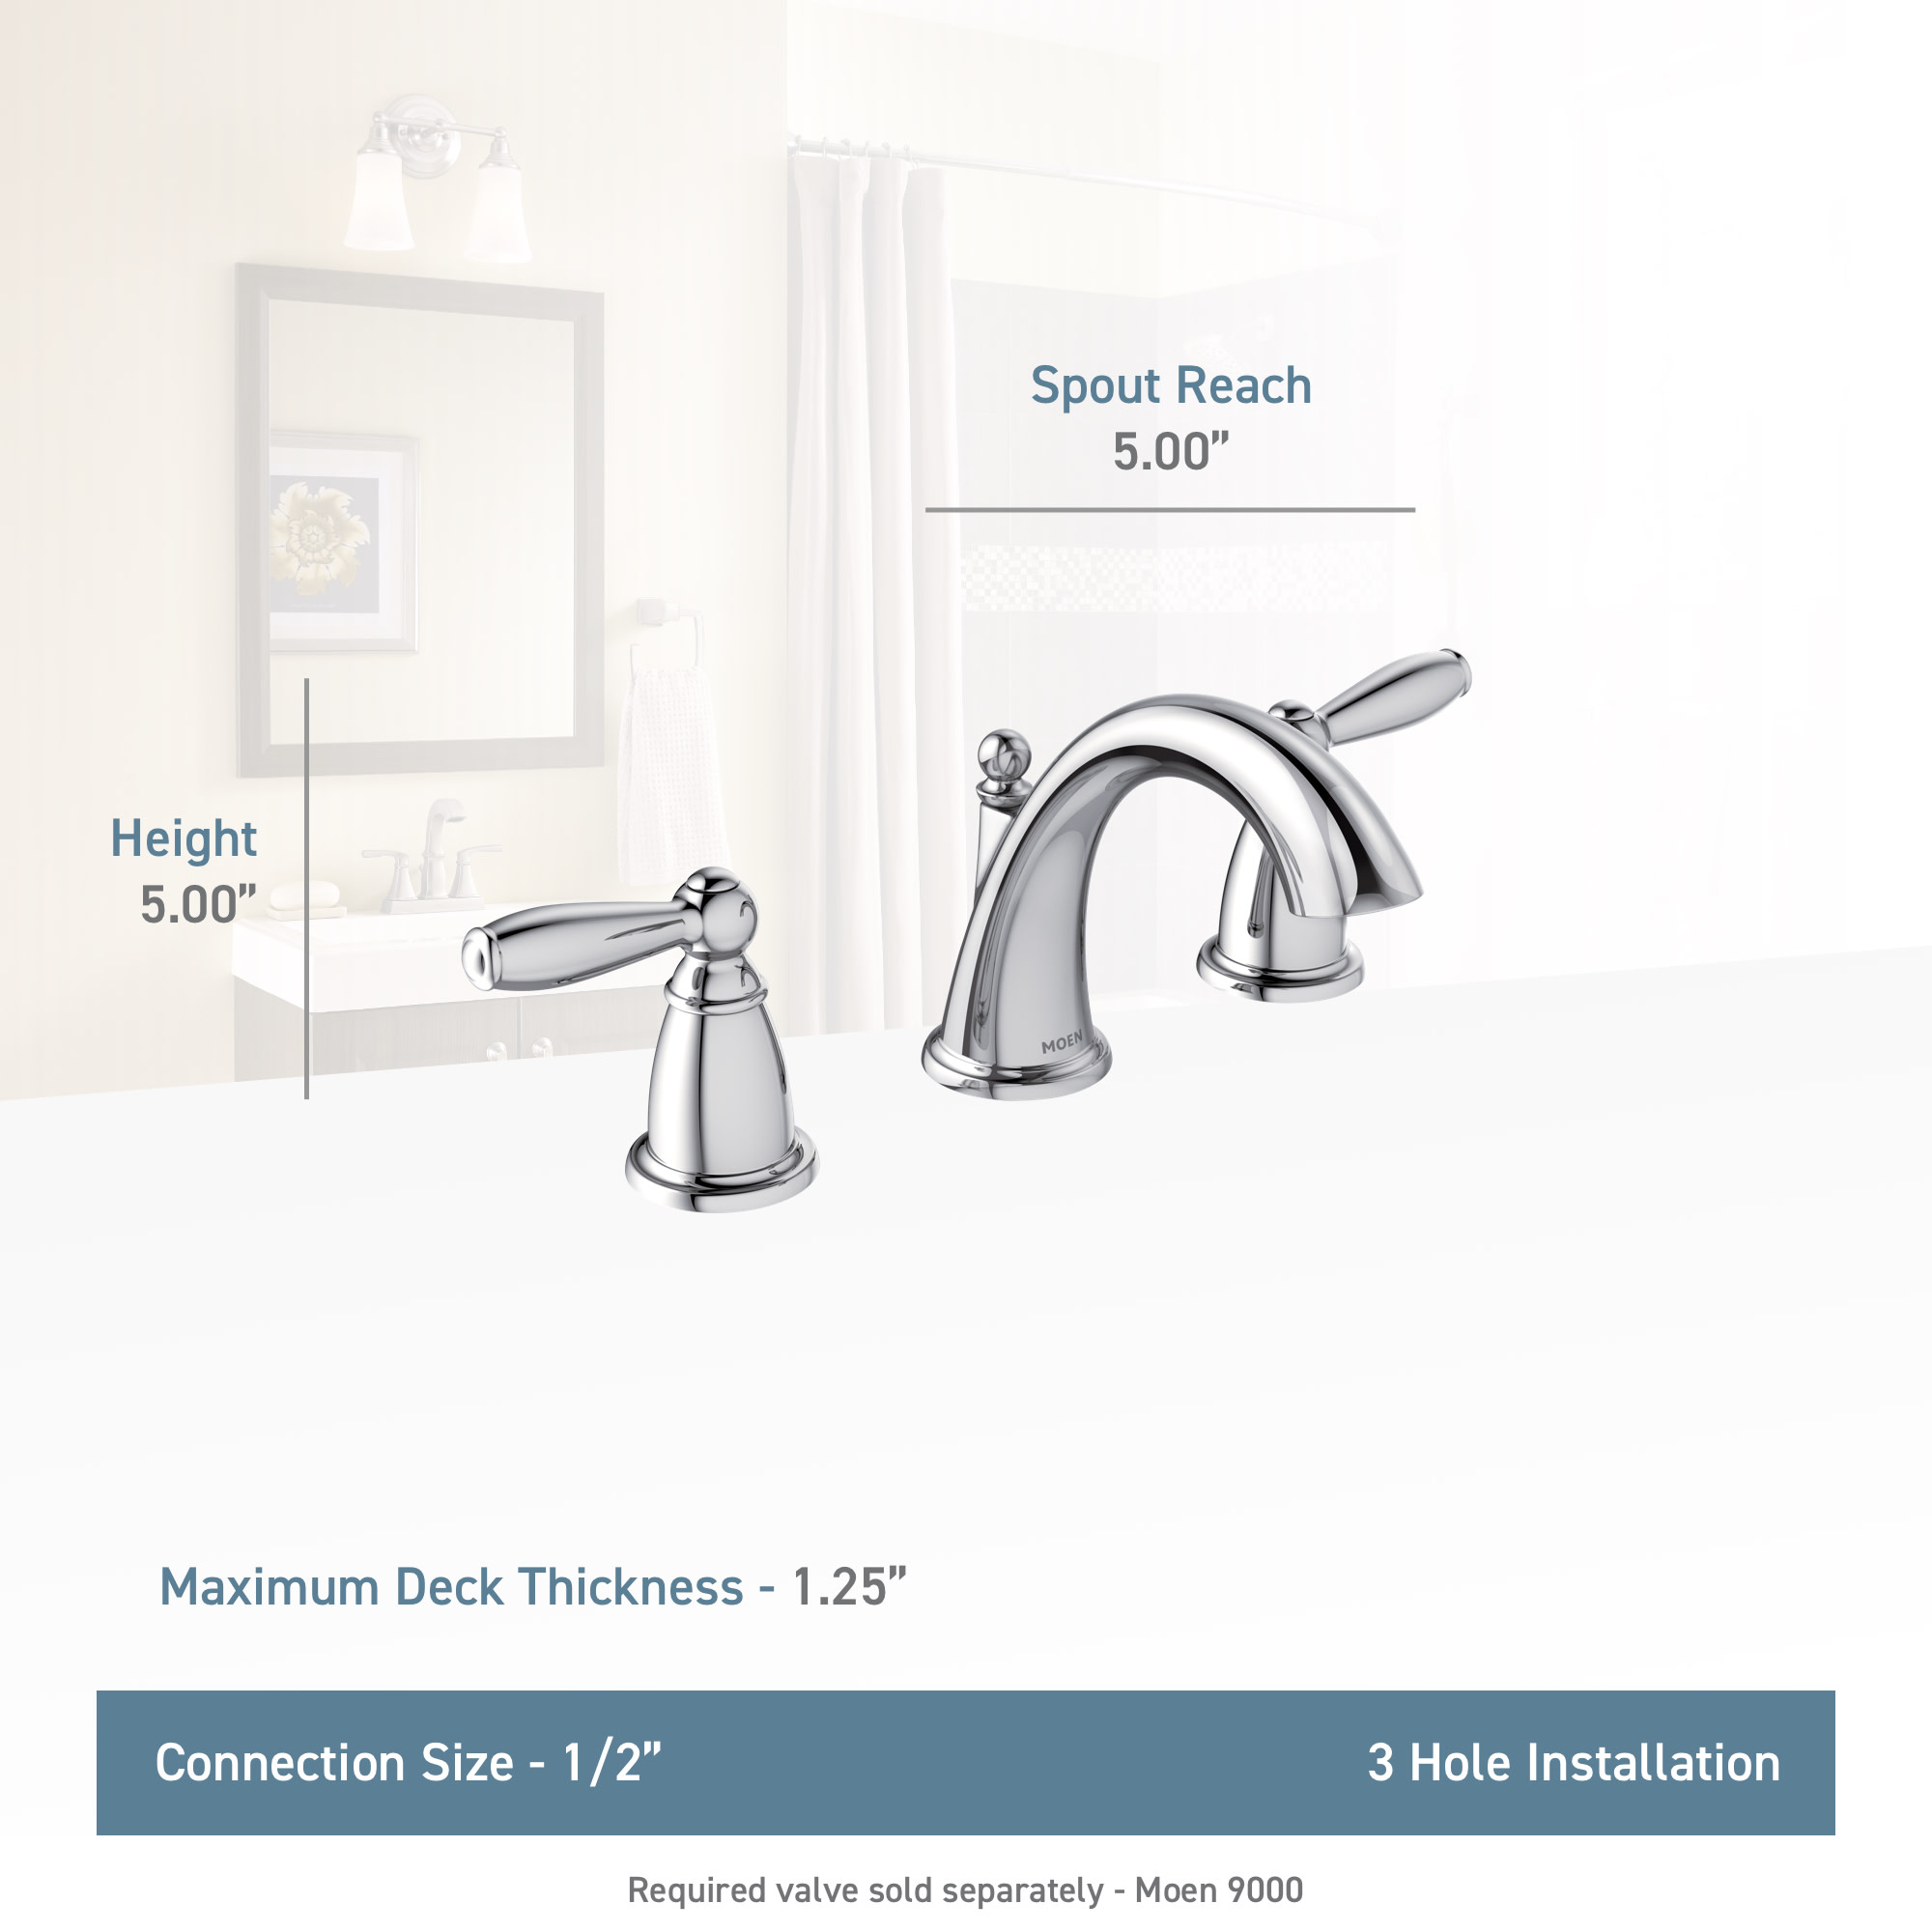 Moen T6620 Lifestyle Specification View 132 